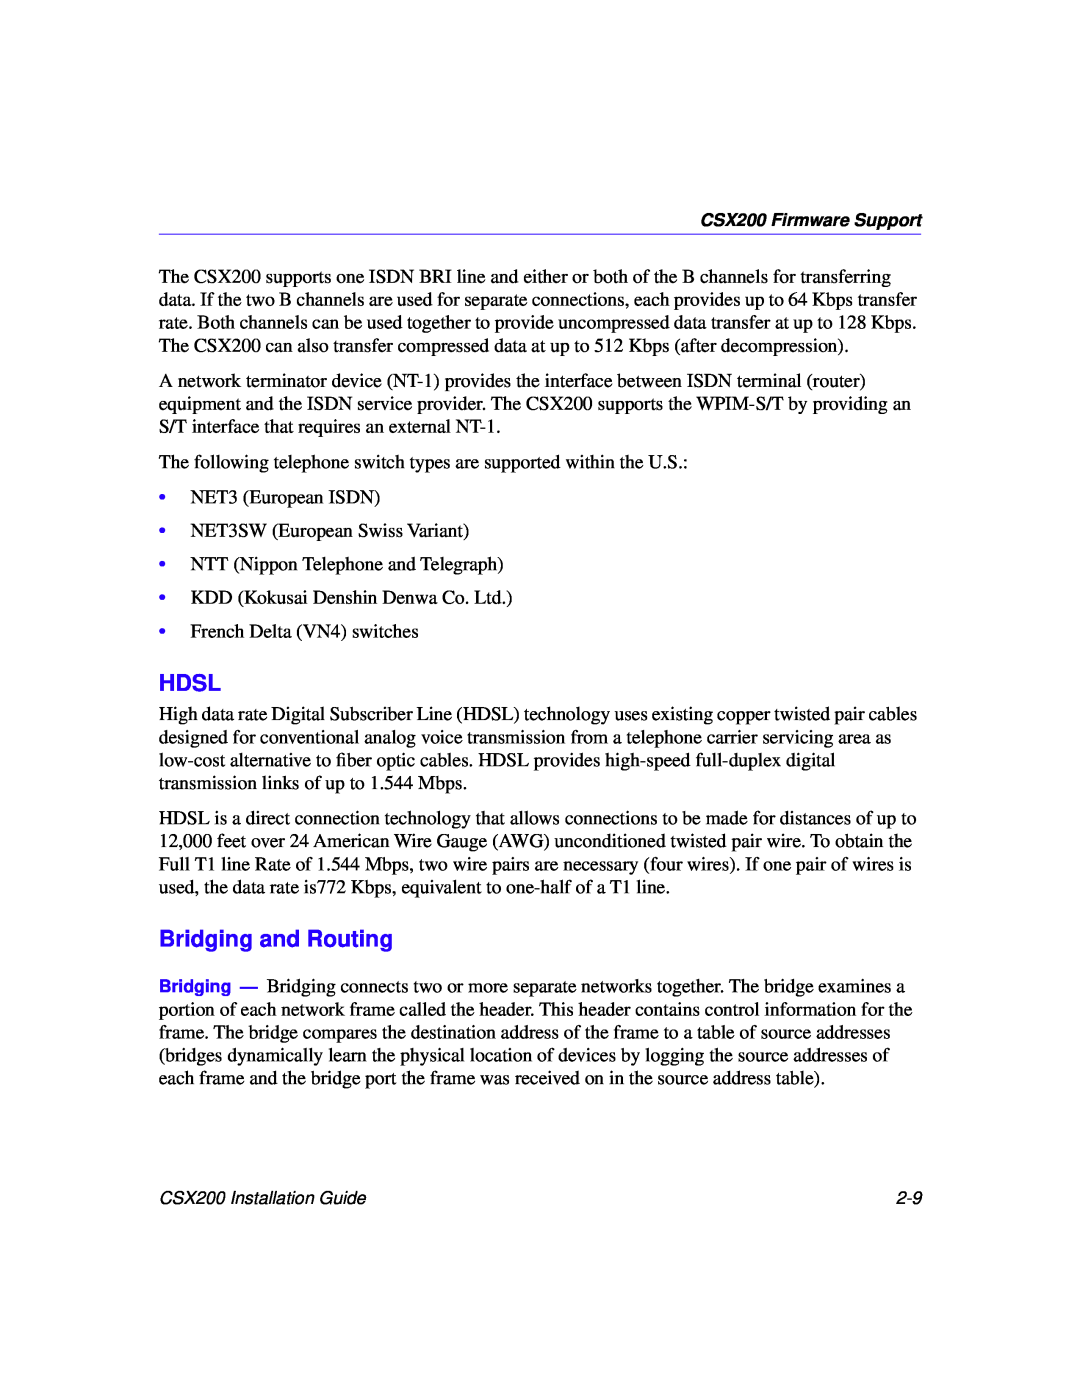 Cabletron Systems CSX200 manual Hdsl, Bridging and Routing 